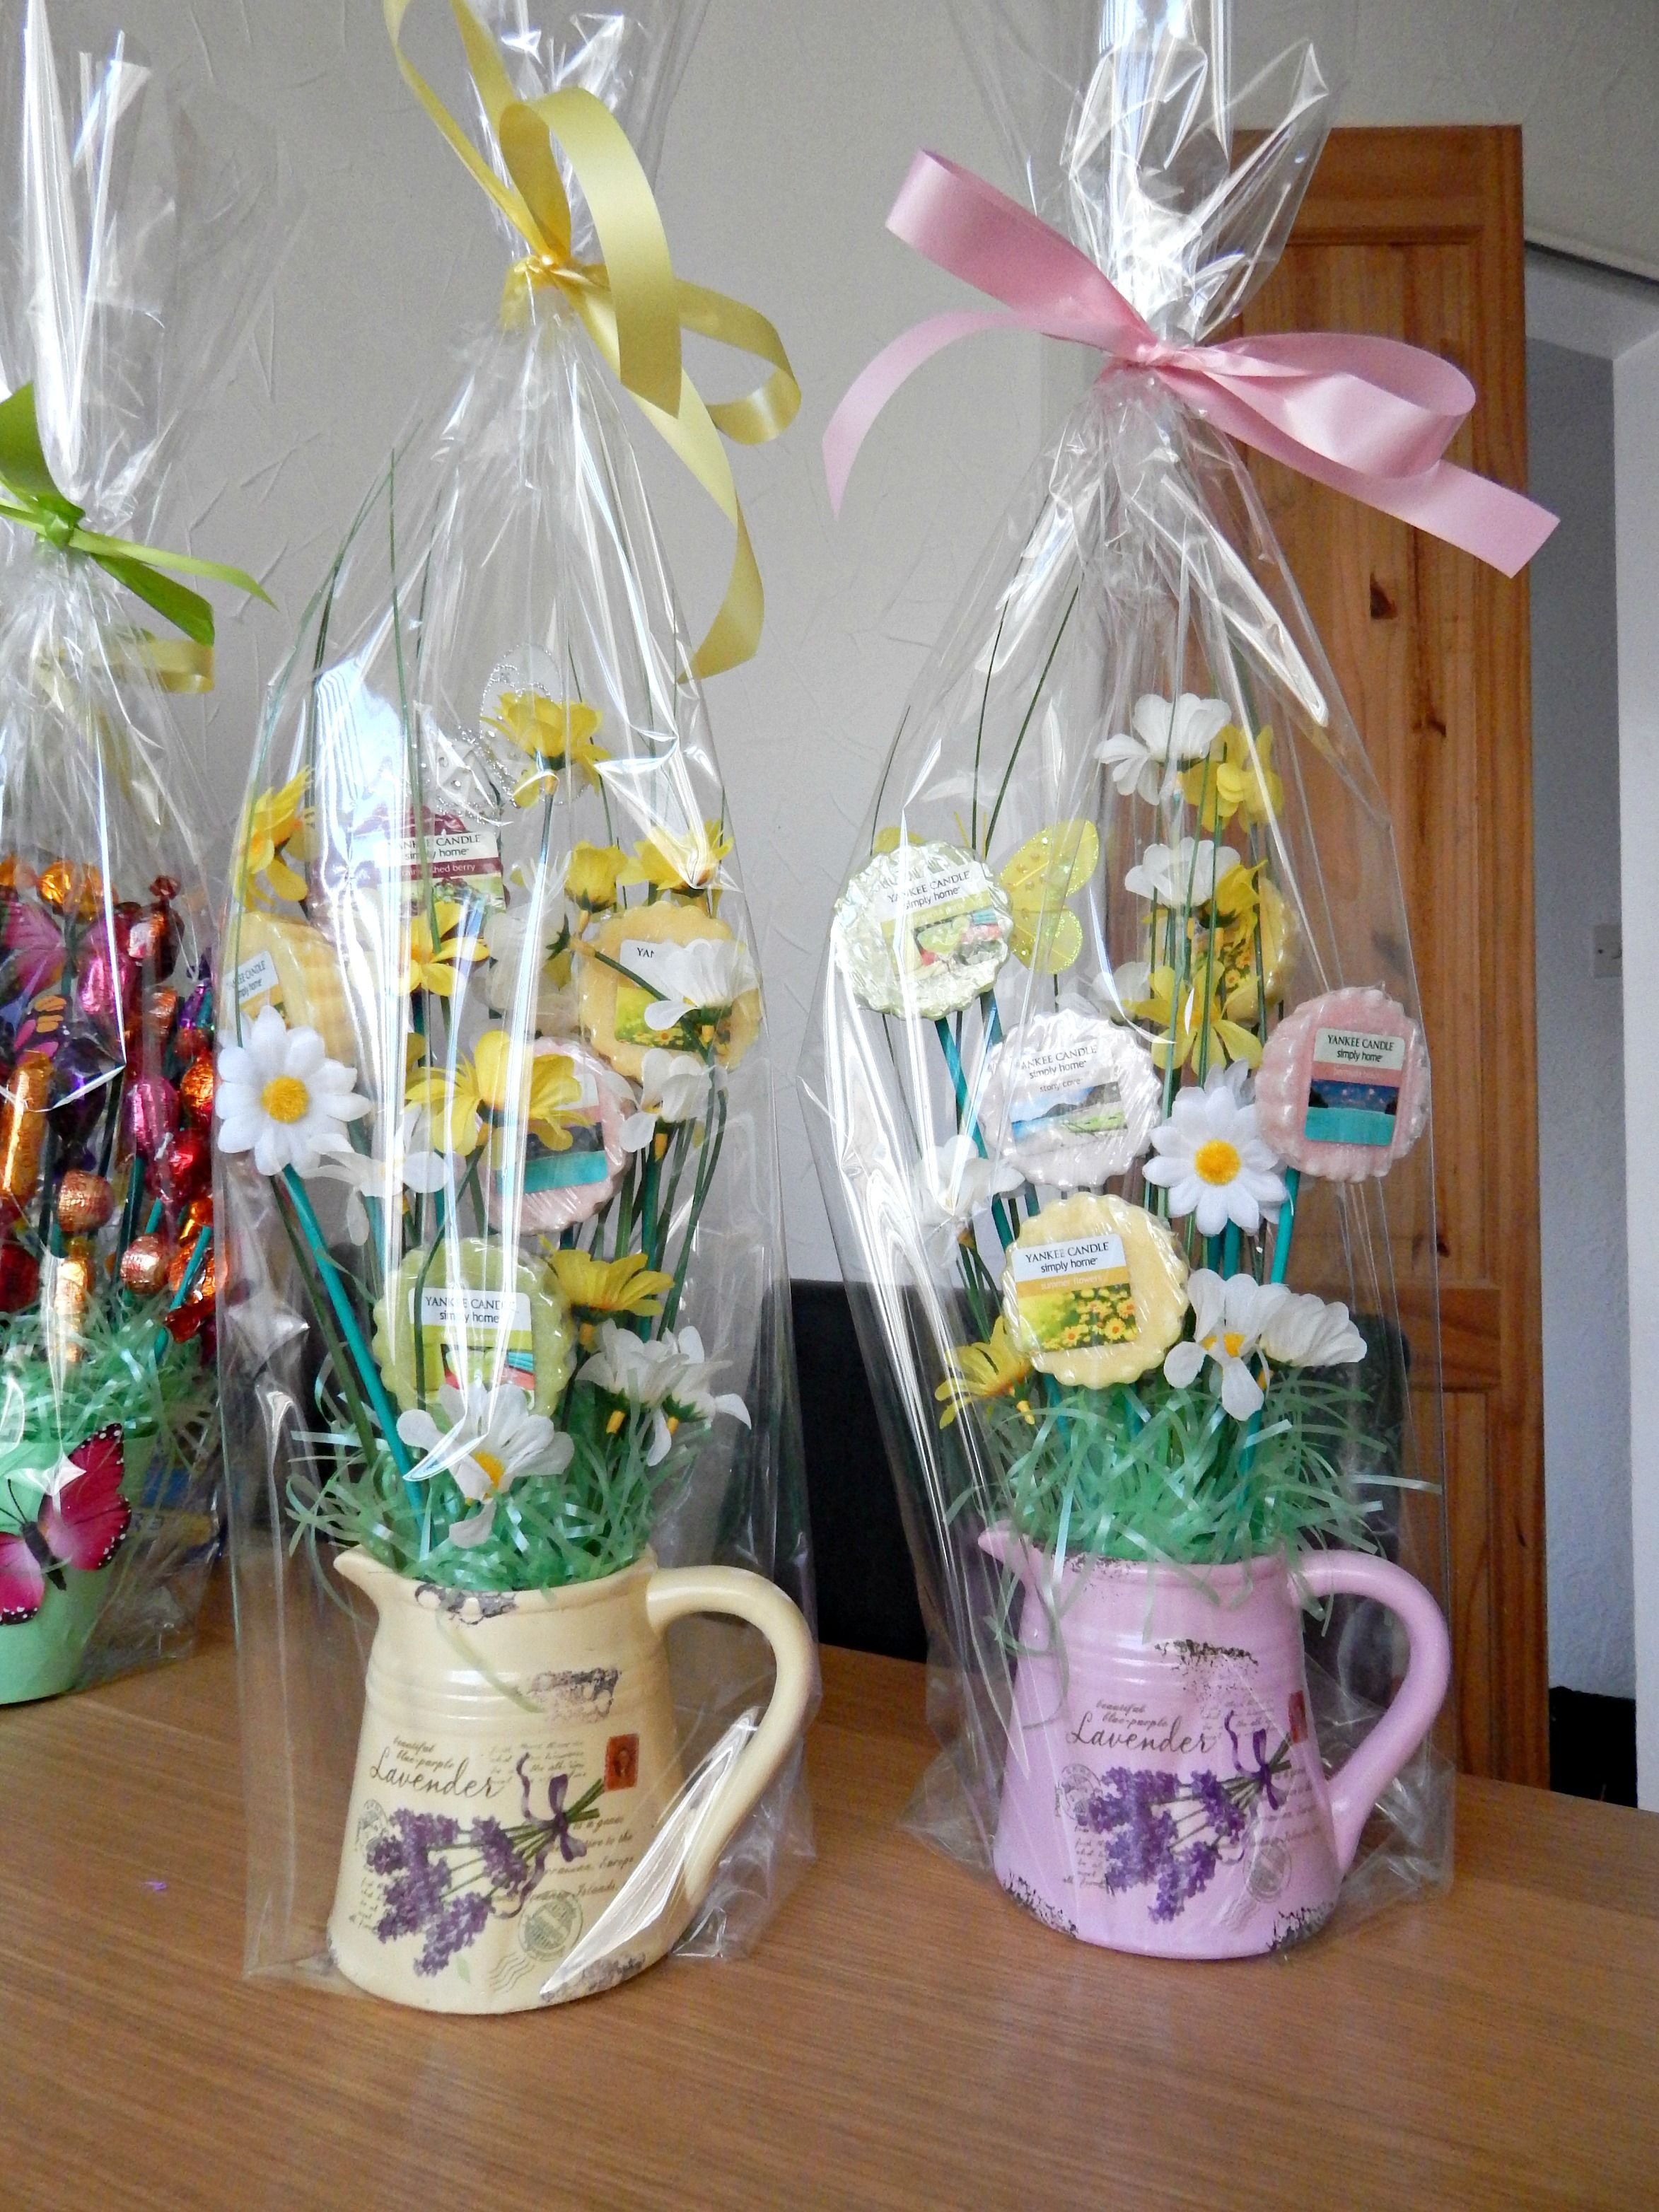 Candle Gift Basket Ideas
 I made these Spring Hampers with Yankee Candle melts